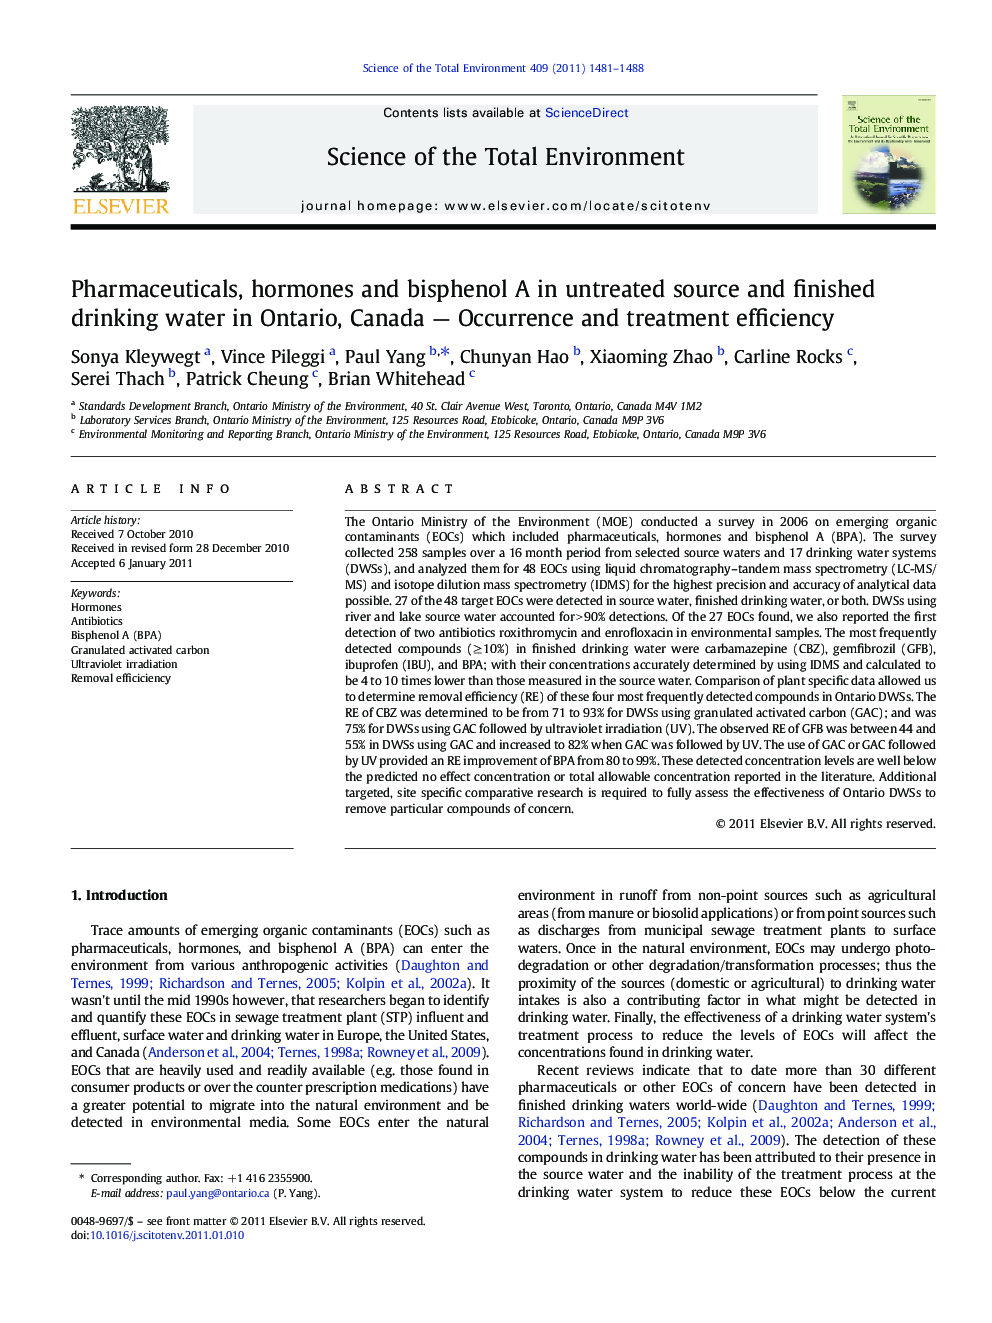 Pharmaceuticals, hormones and bisphenol A in untreated source and finished drinking water in Ontario, Canada — Occurrence and treatment efficiency